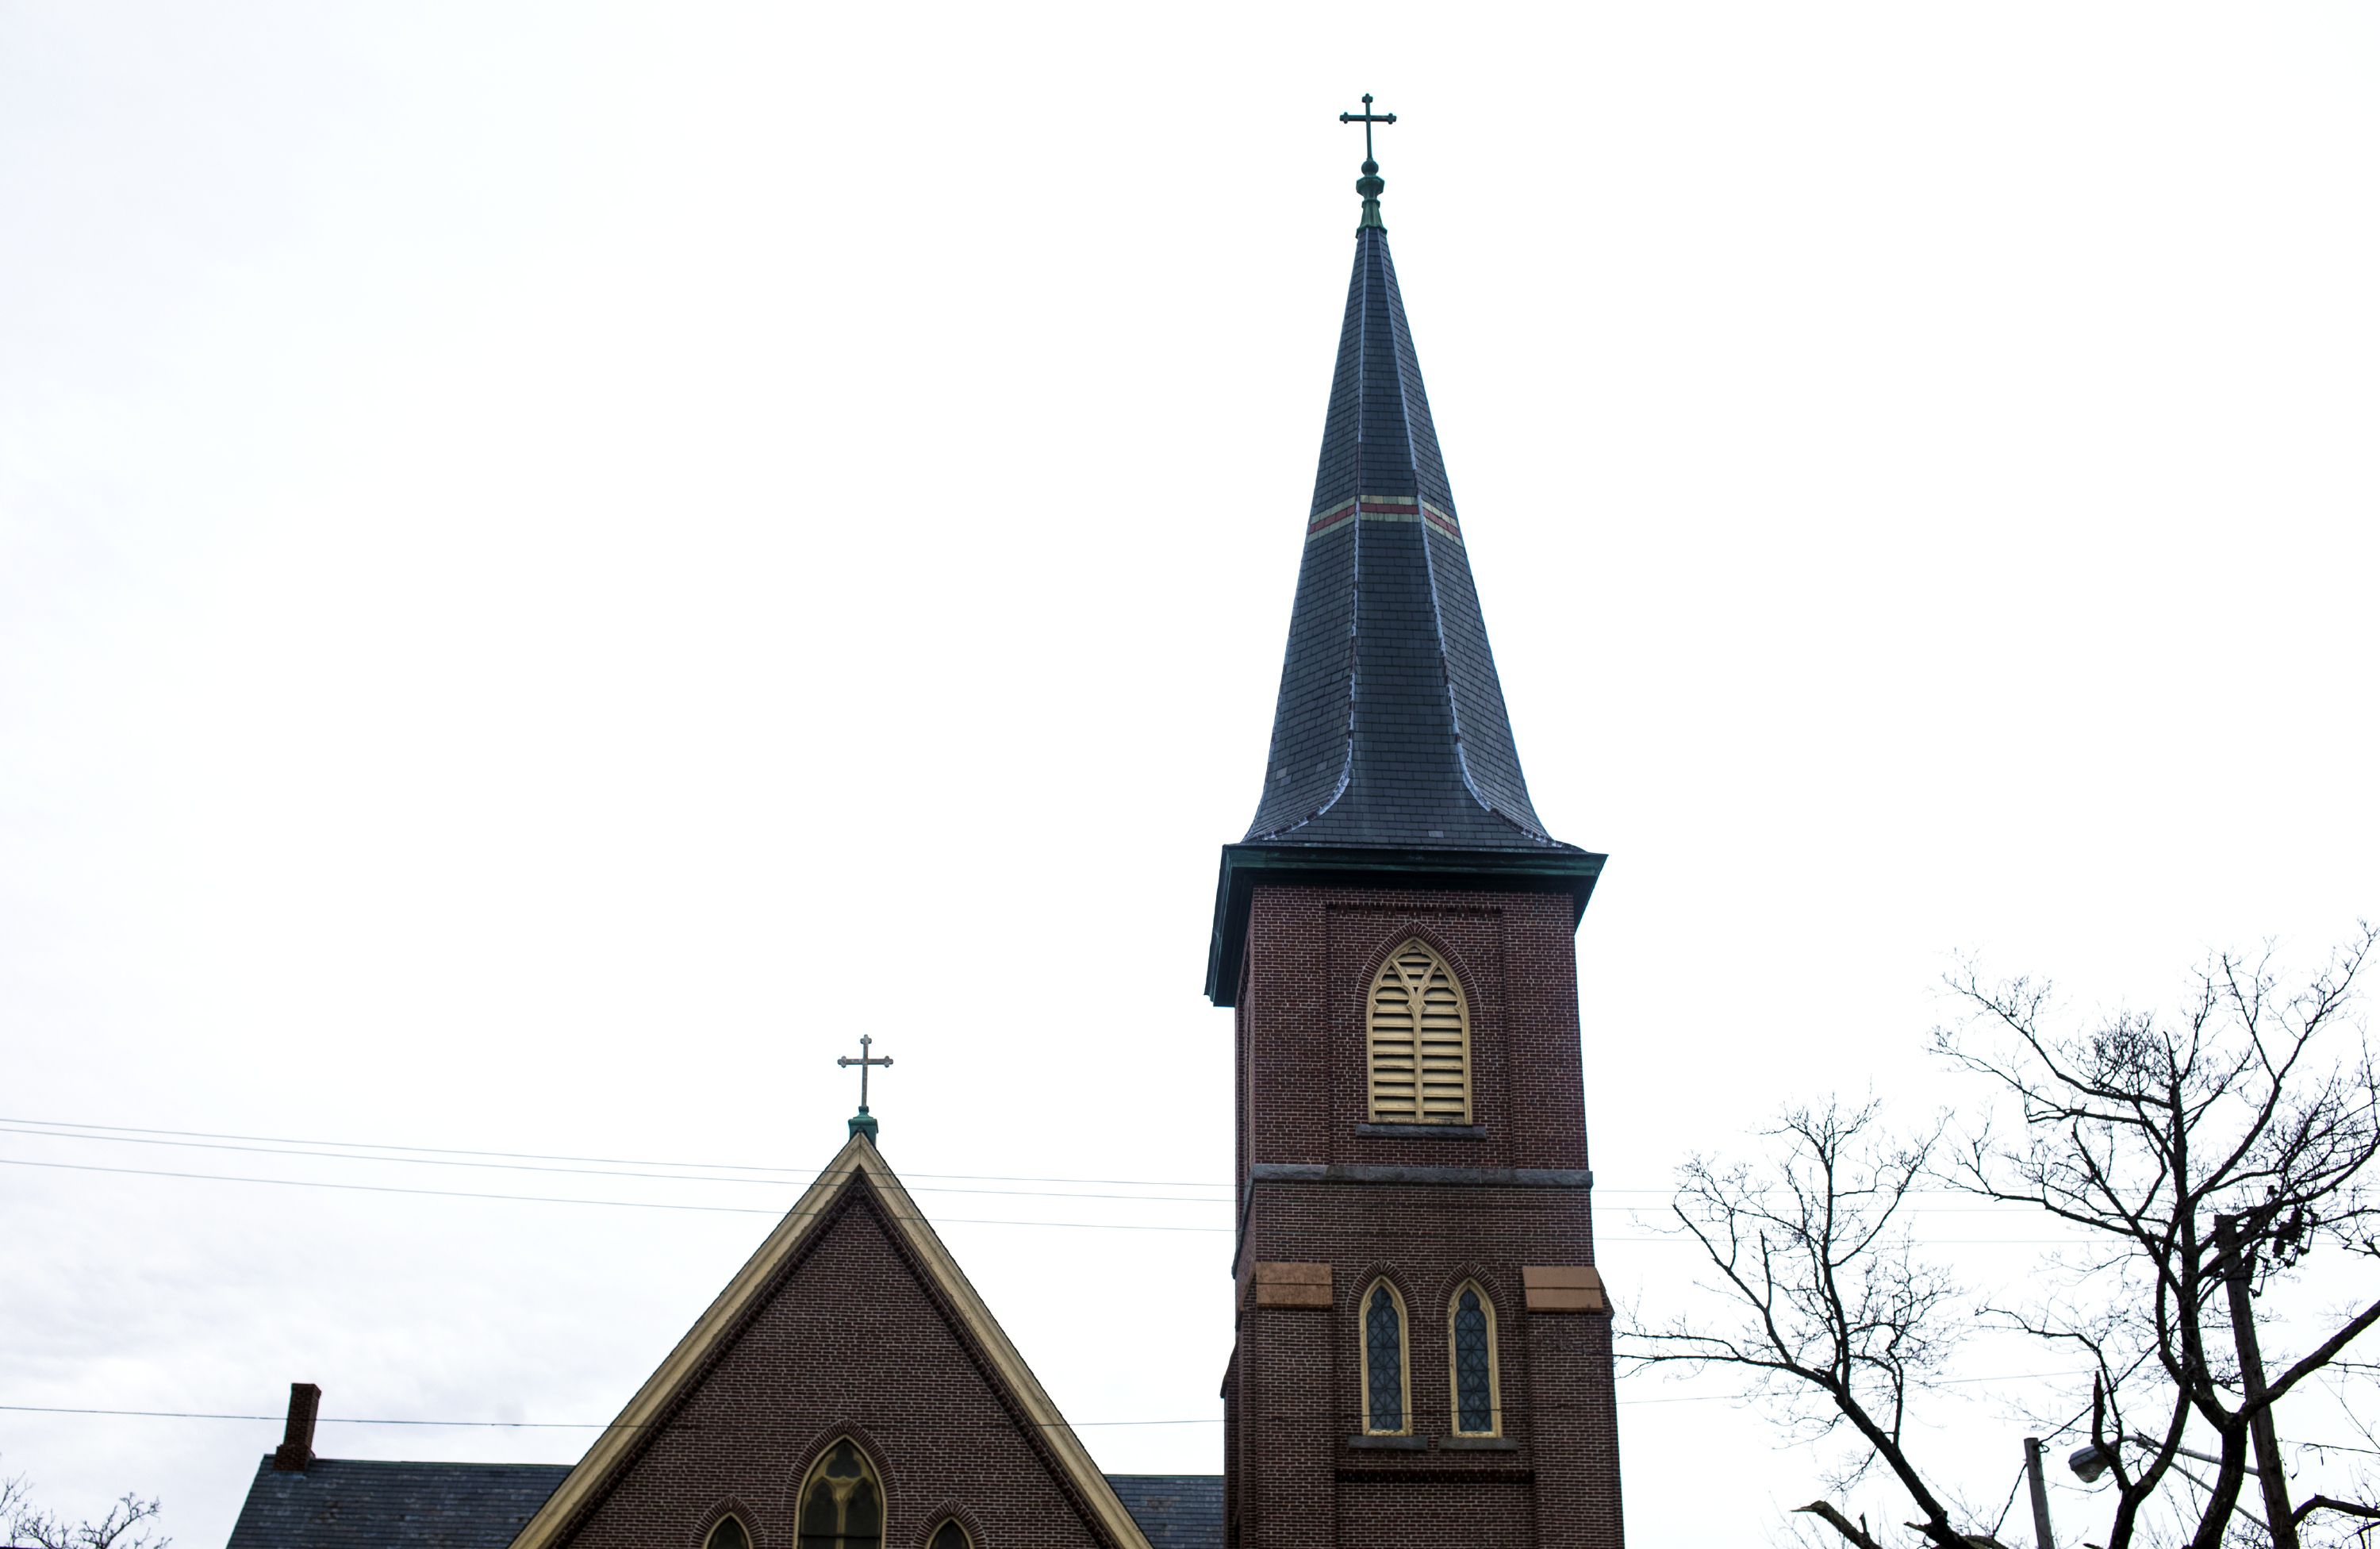 Christ the King Catholic Parish on South Main Street in Concord.